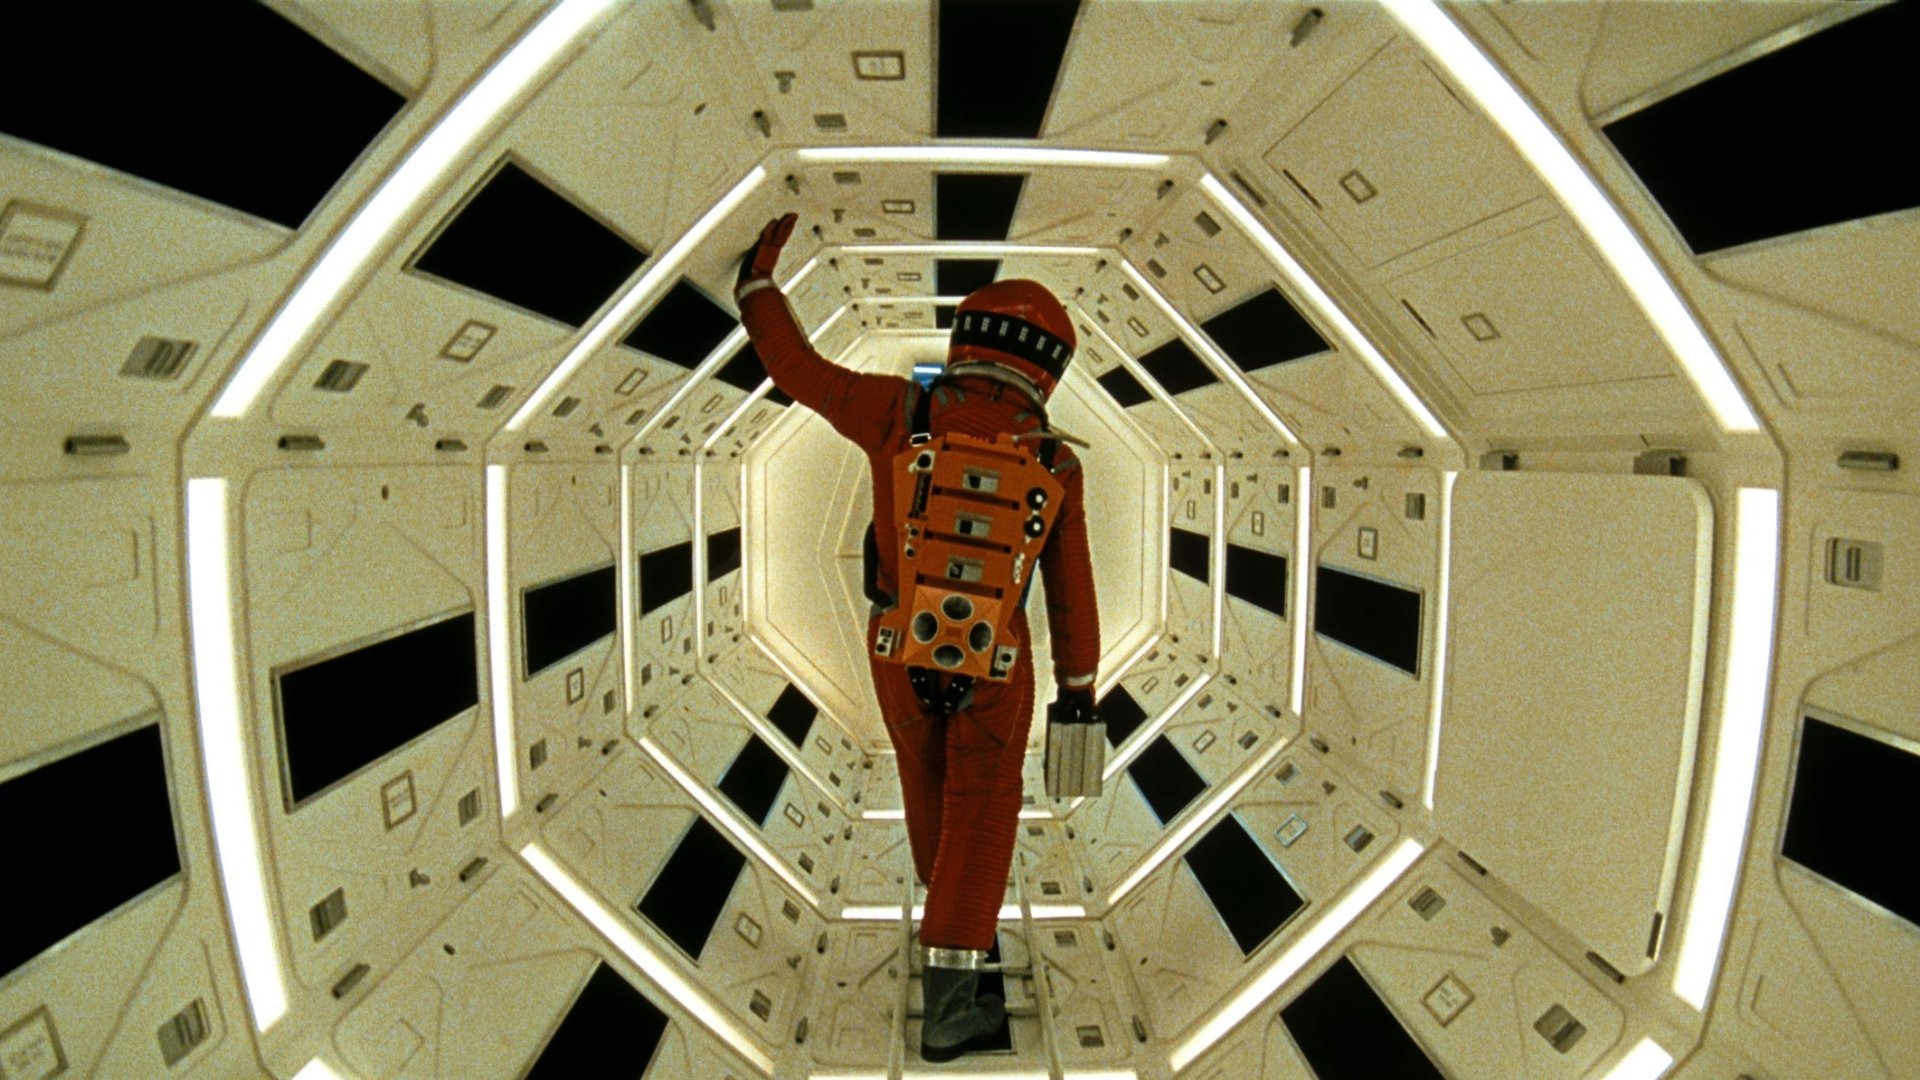 Awesome 2001: A Space Odyssey free wallpaper ID:17783 for full hd PC